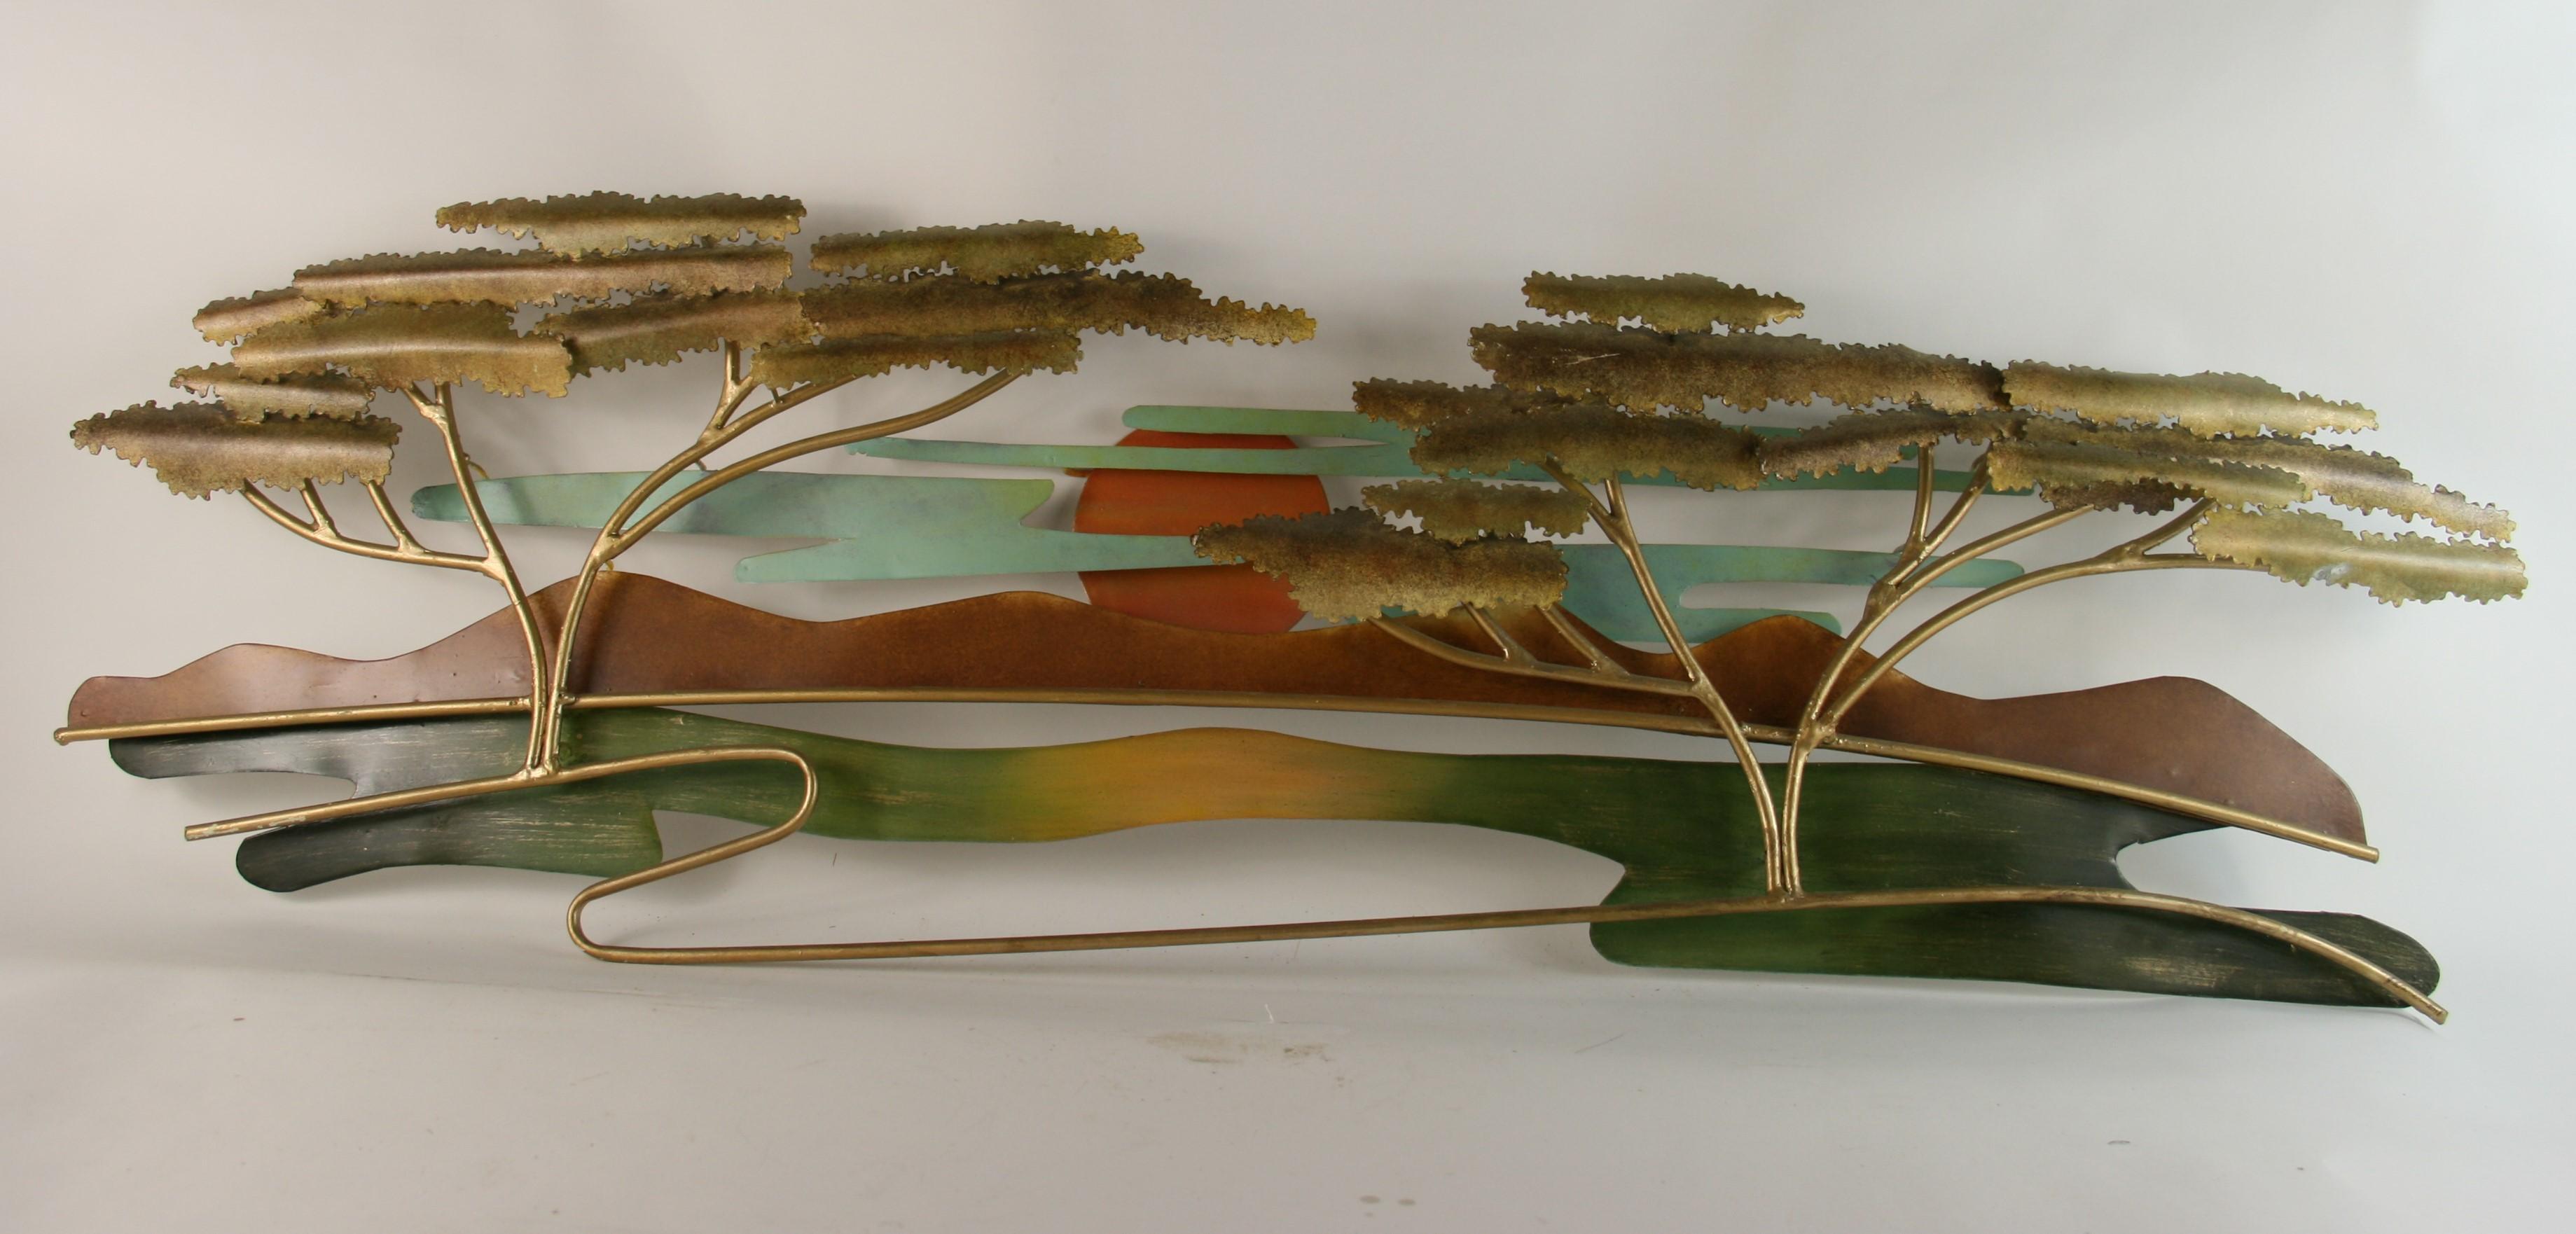 3-443 colorful metal wall sculpture with trees, clouds and sun
Signed J.Waner 2011.